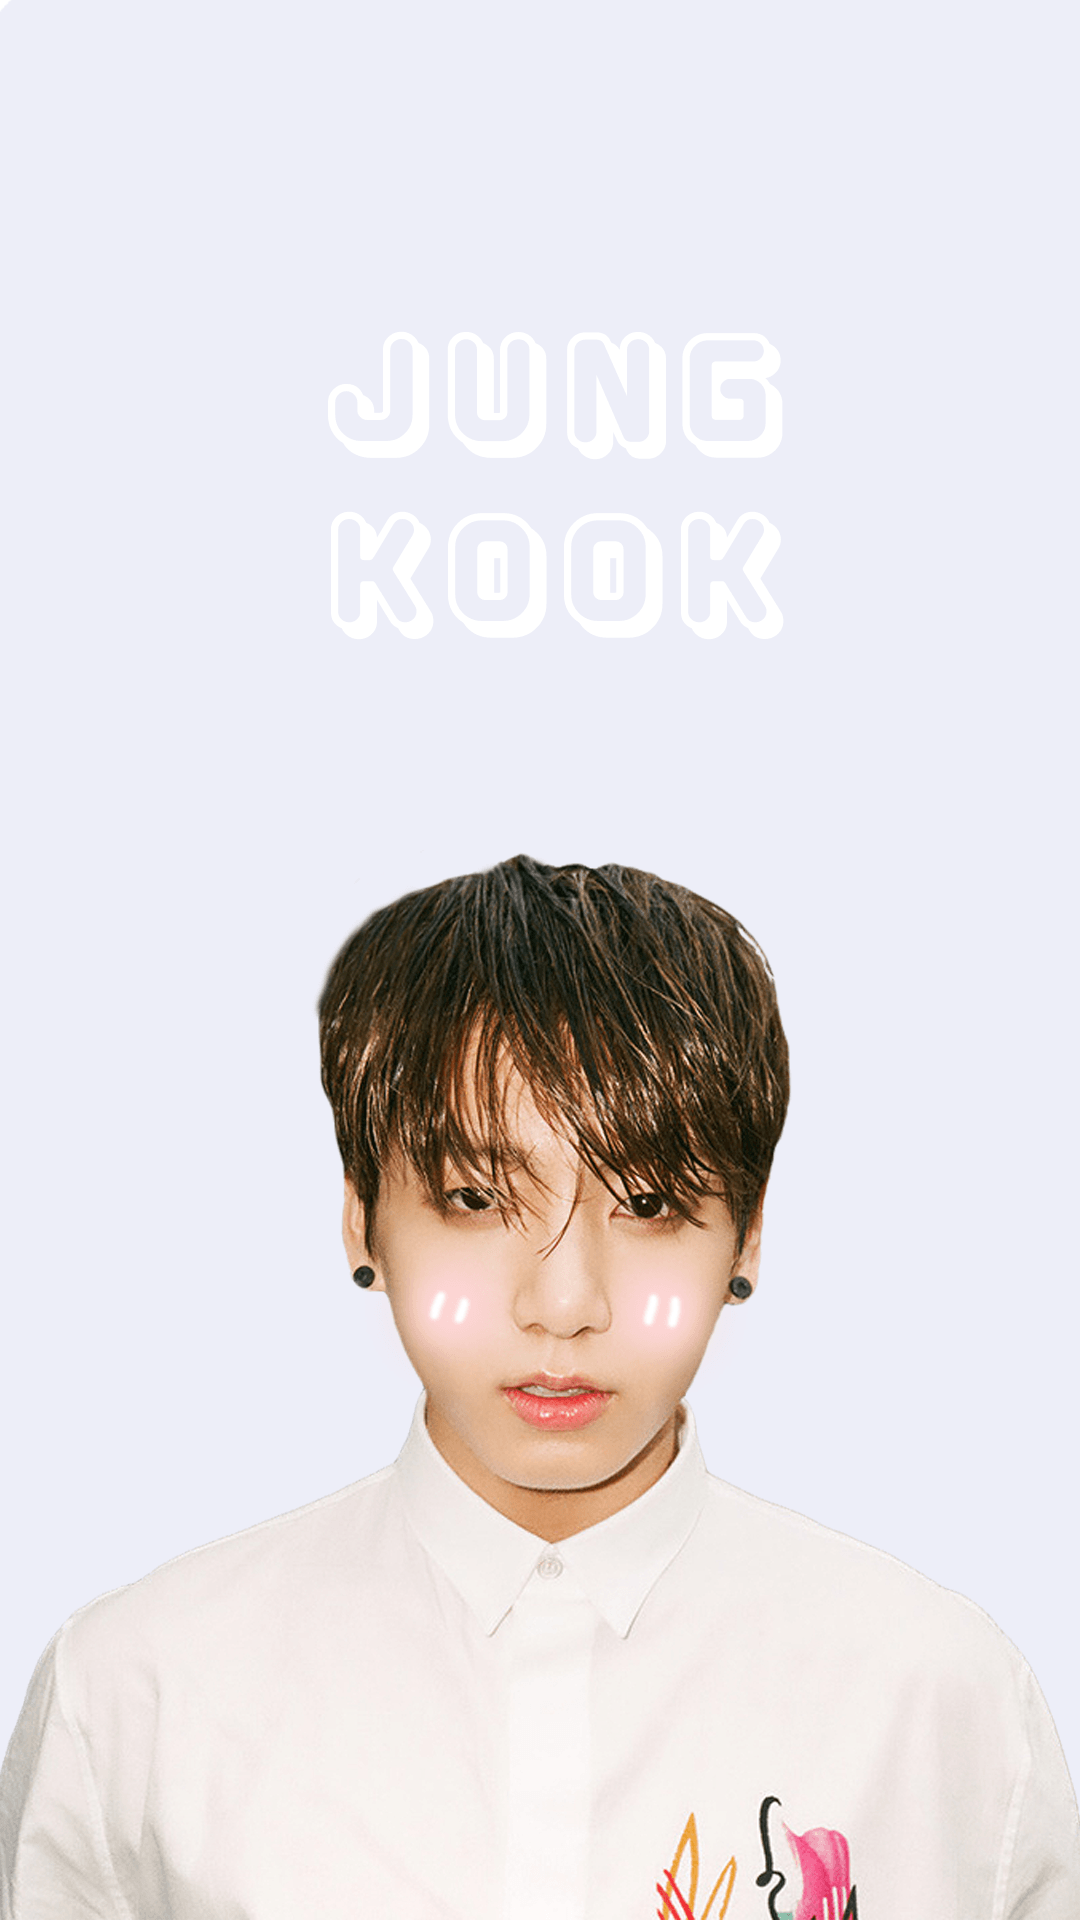 archive, jungkook wallpaper for anon(s)